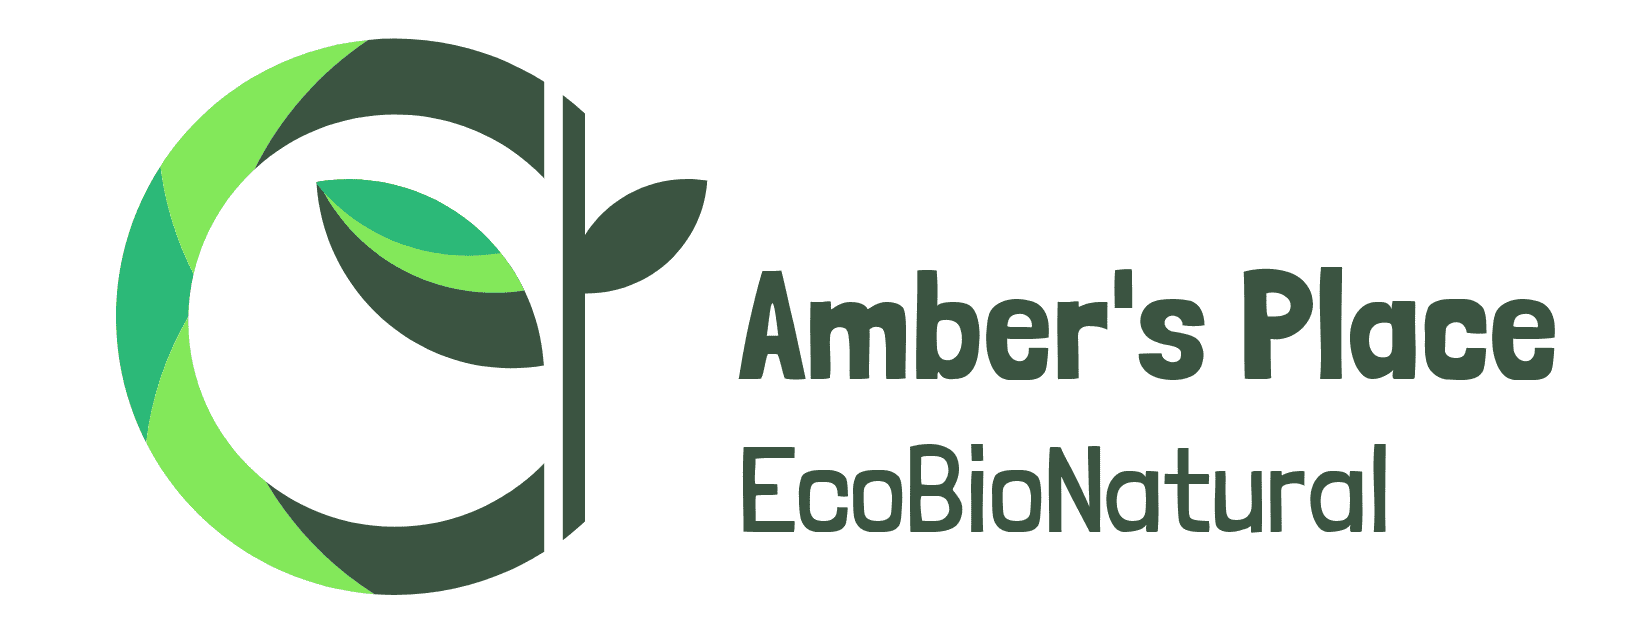 Store Amber's Place - EcoBioNatural